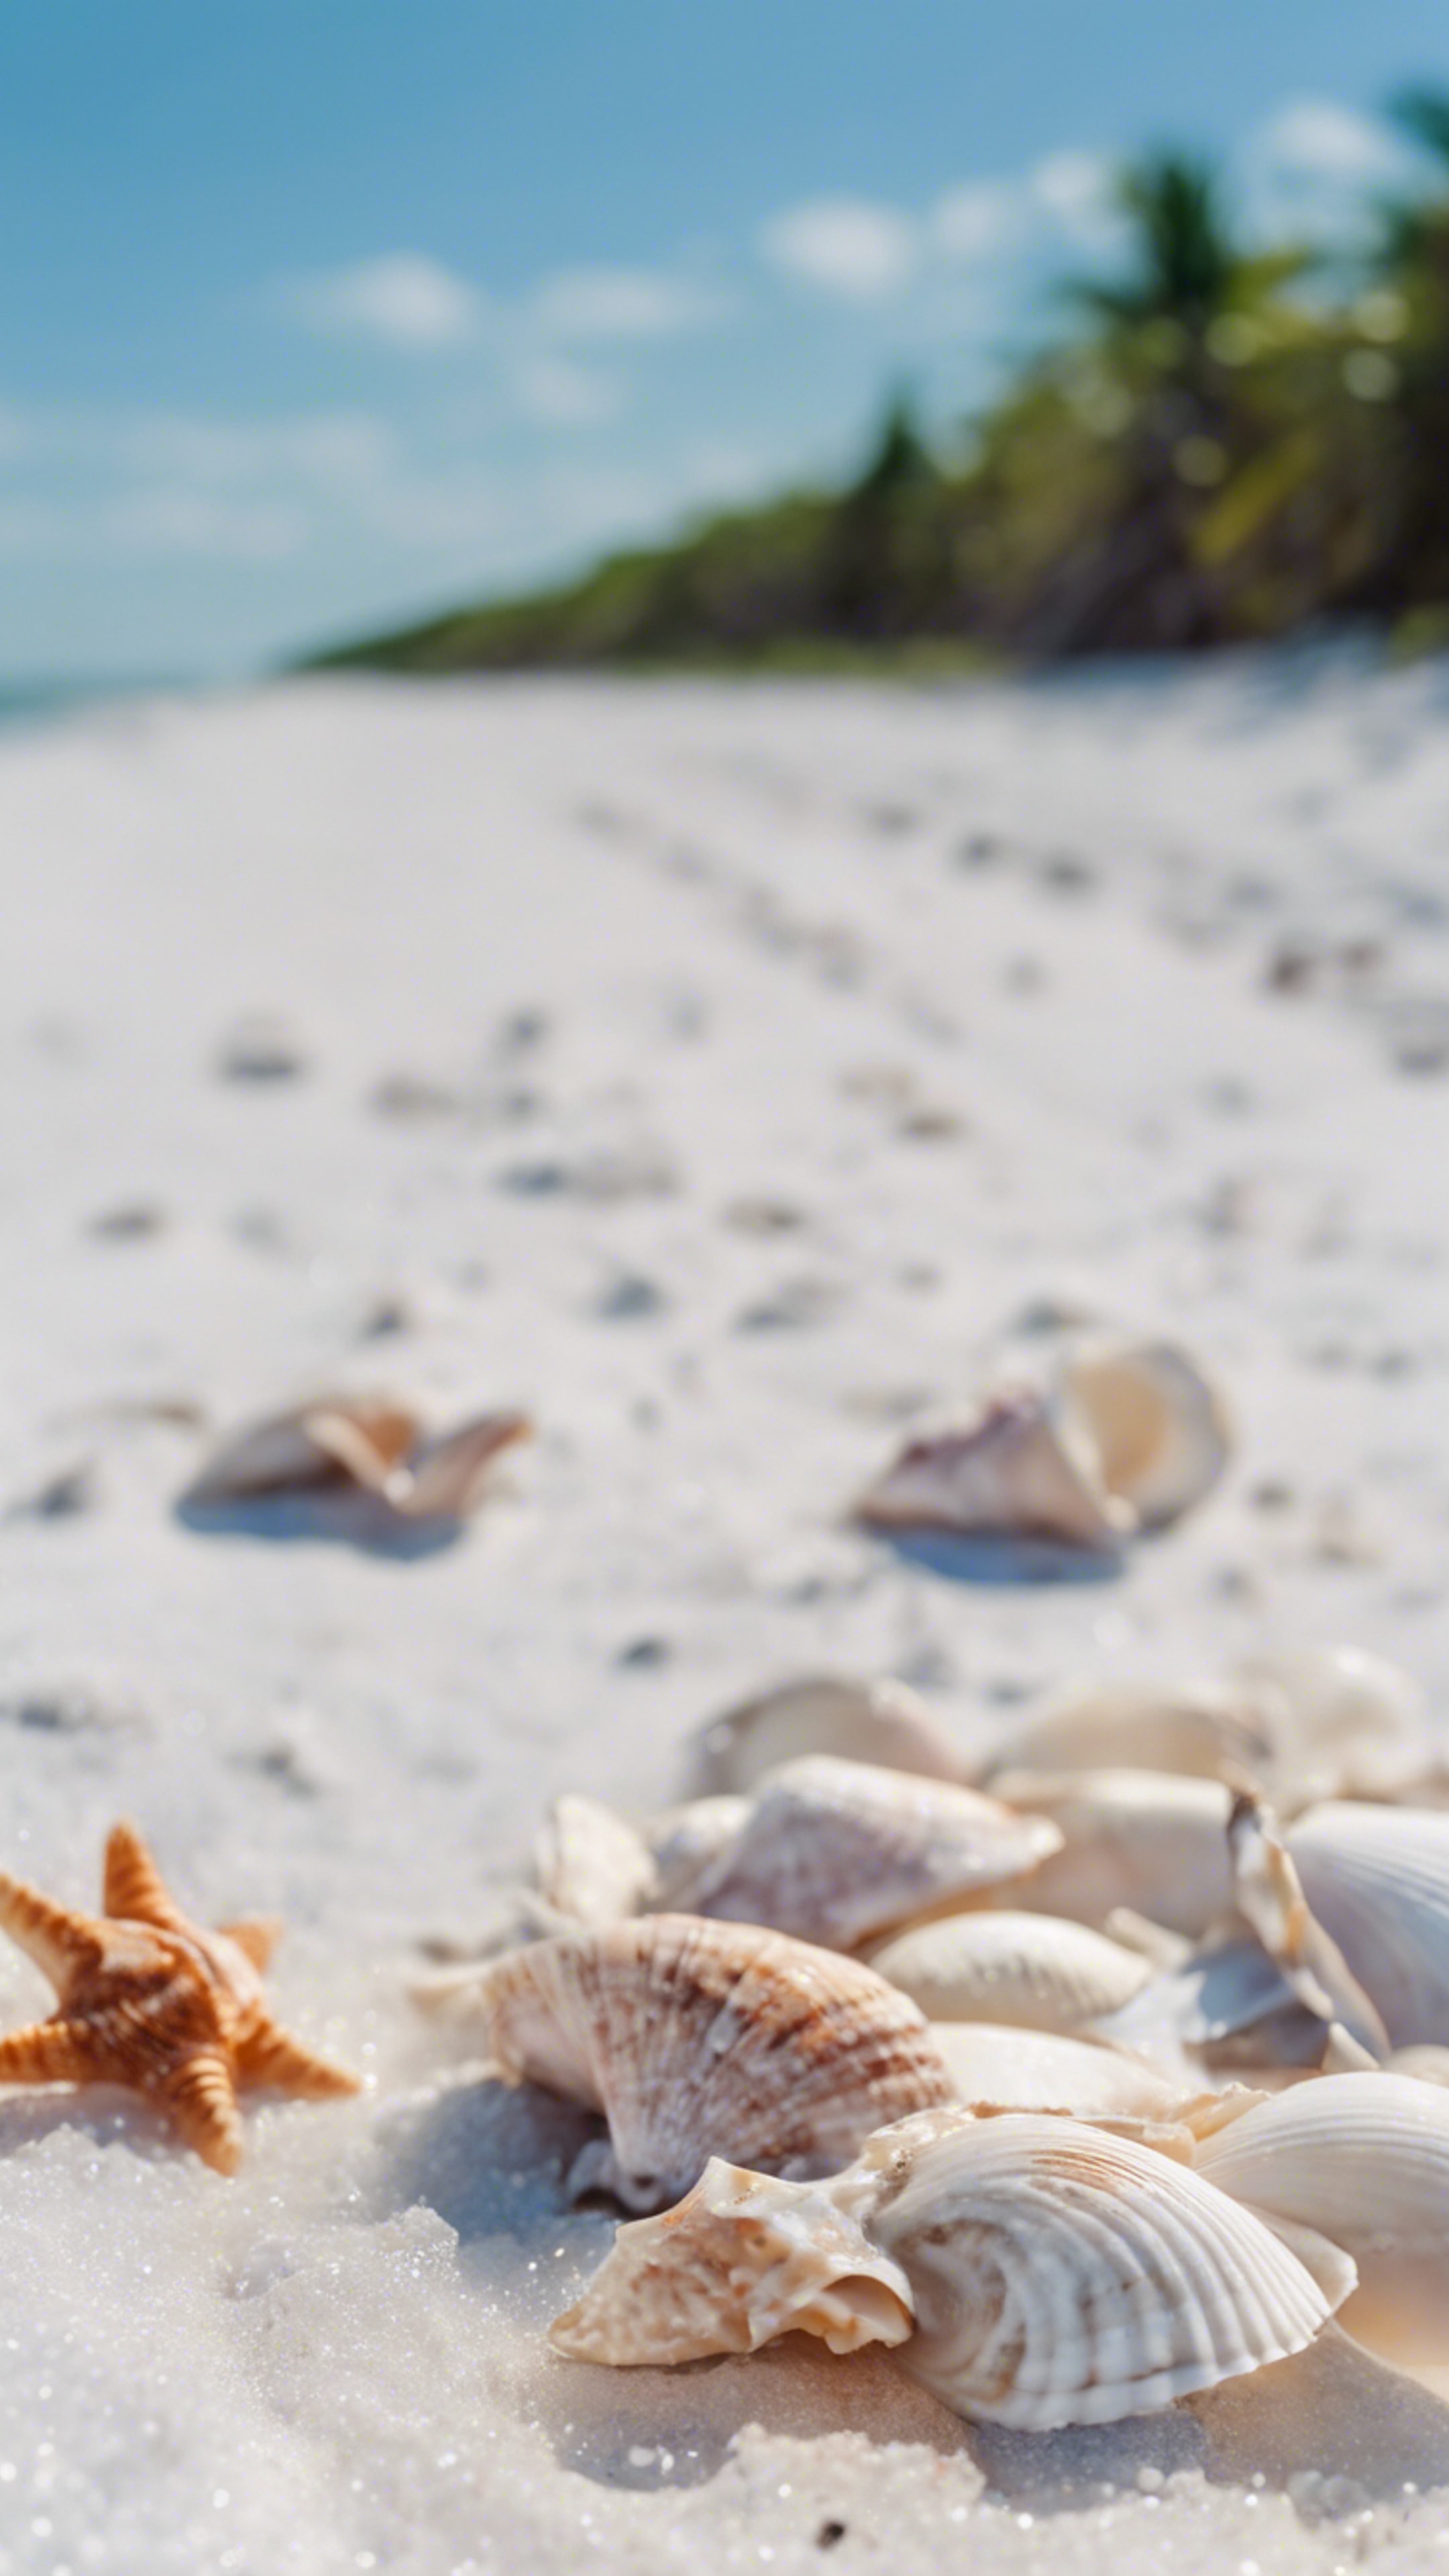 Seashells scattered along the pure white sandy beaches of Sanibel Island under clear, blue skies. Ფონი[1c53aef66a12437c830d]